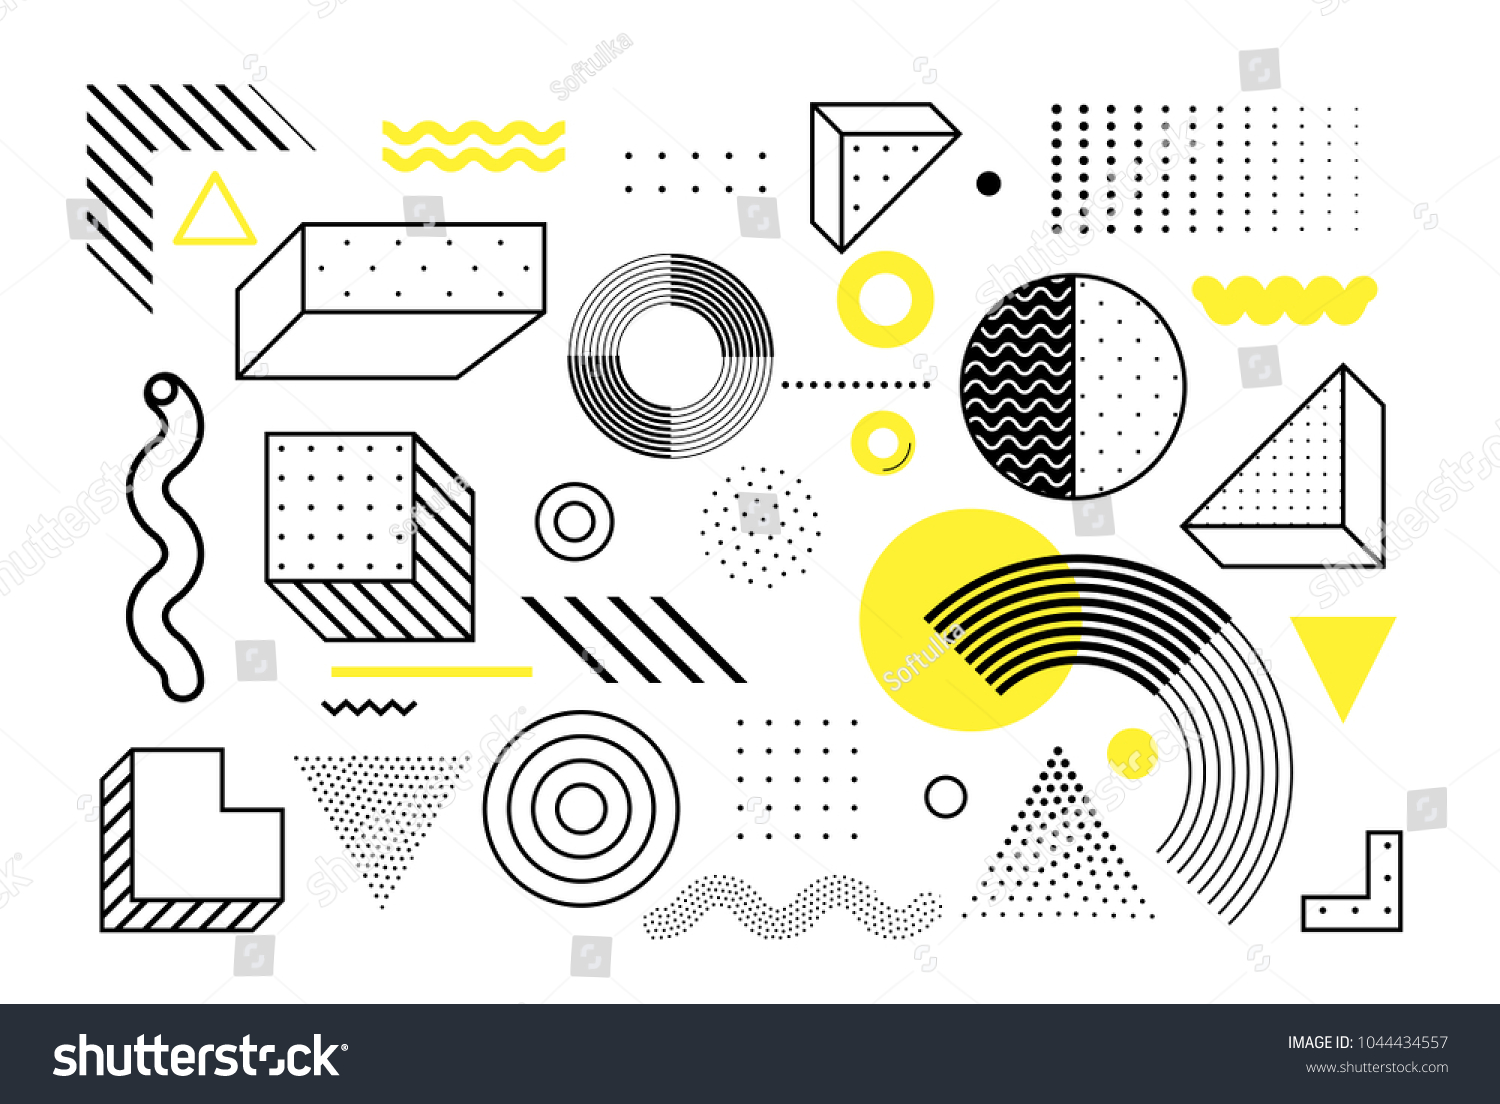 Universal trend halftone geometric shapes set juxtaposed with bright bold yellow elements composition. Design elements for Magazine, leaflet, billboard, sale #1044434557